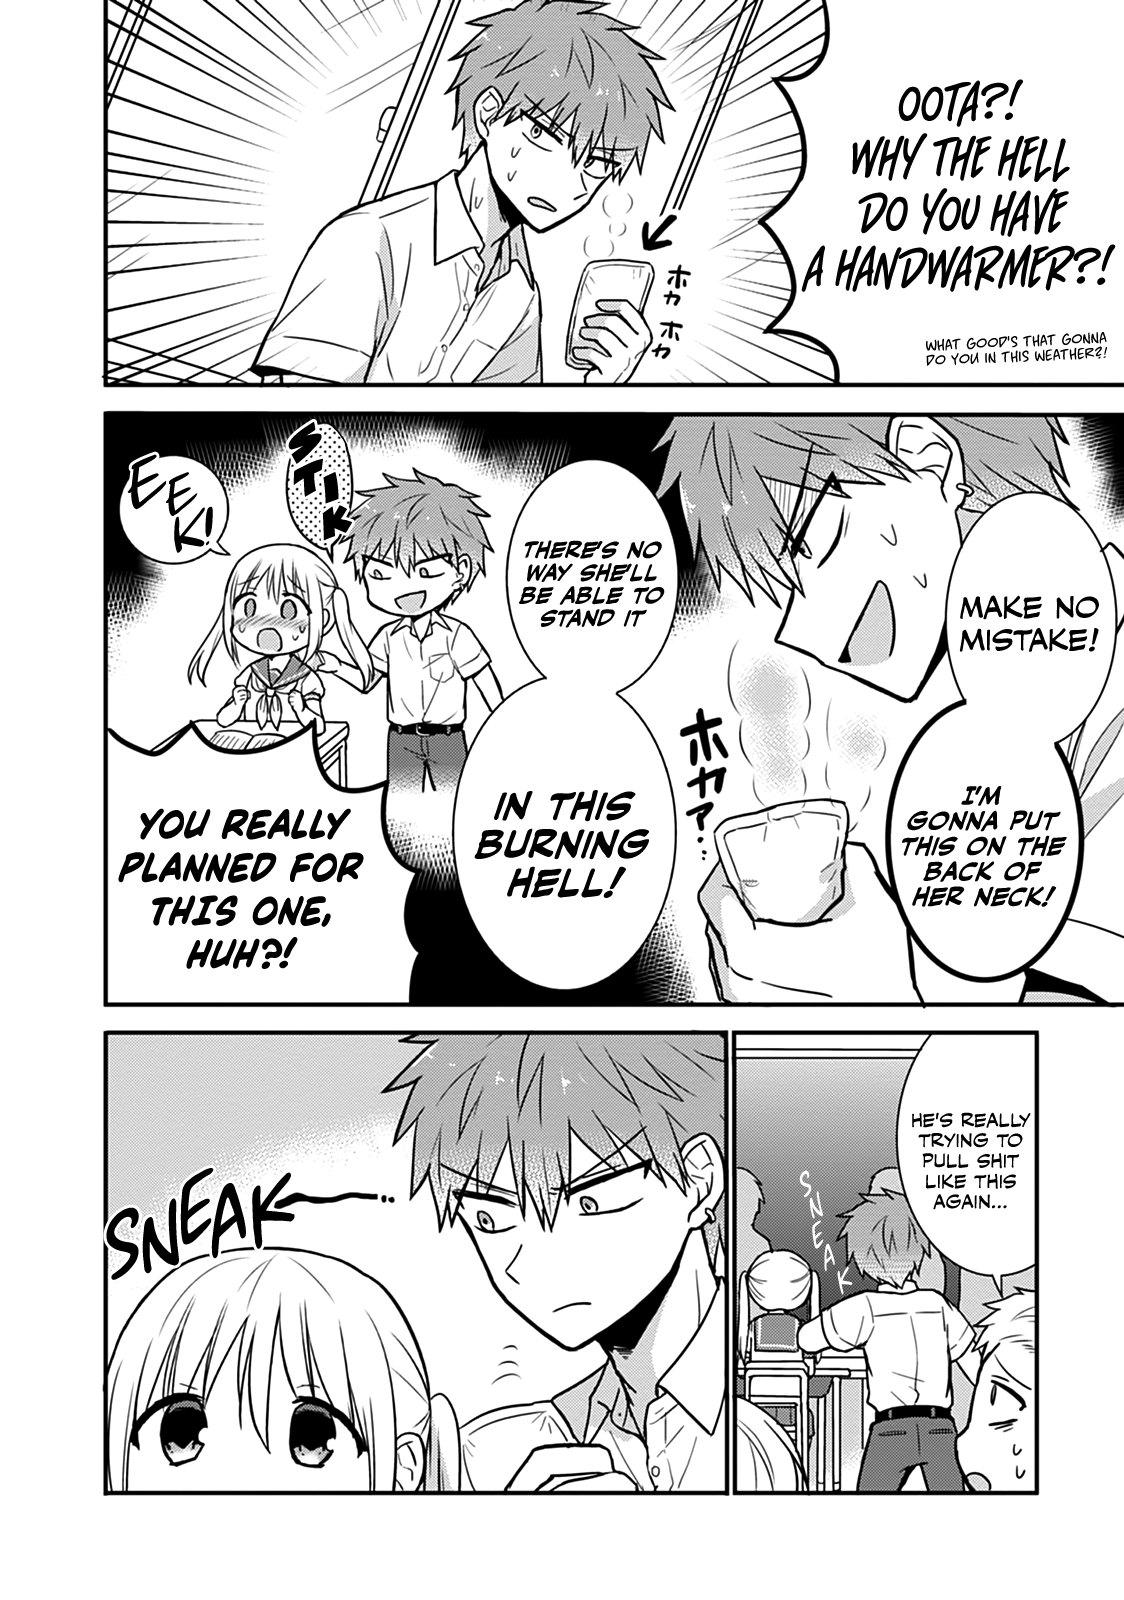 Expressionless Kashiwada-San And Emotional Oota-Kun Vol.3 Chapter 32: Kashiwada-San, Oota-Kun, And The Heat Wave - Picture 3